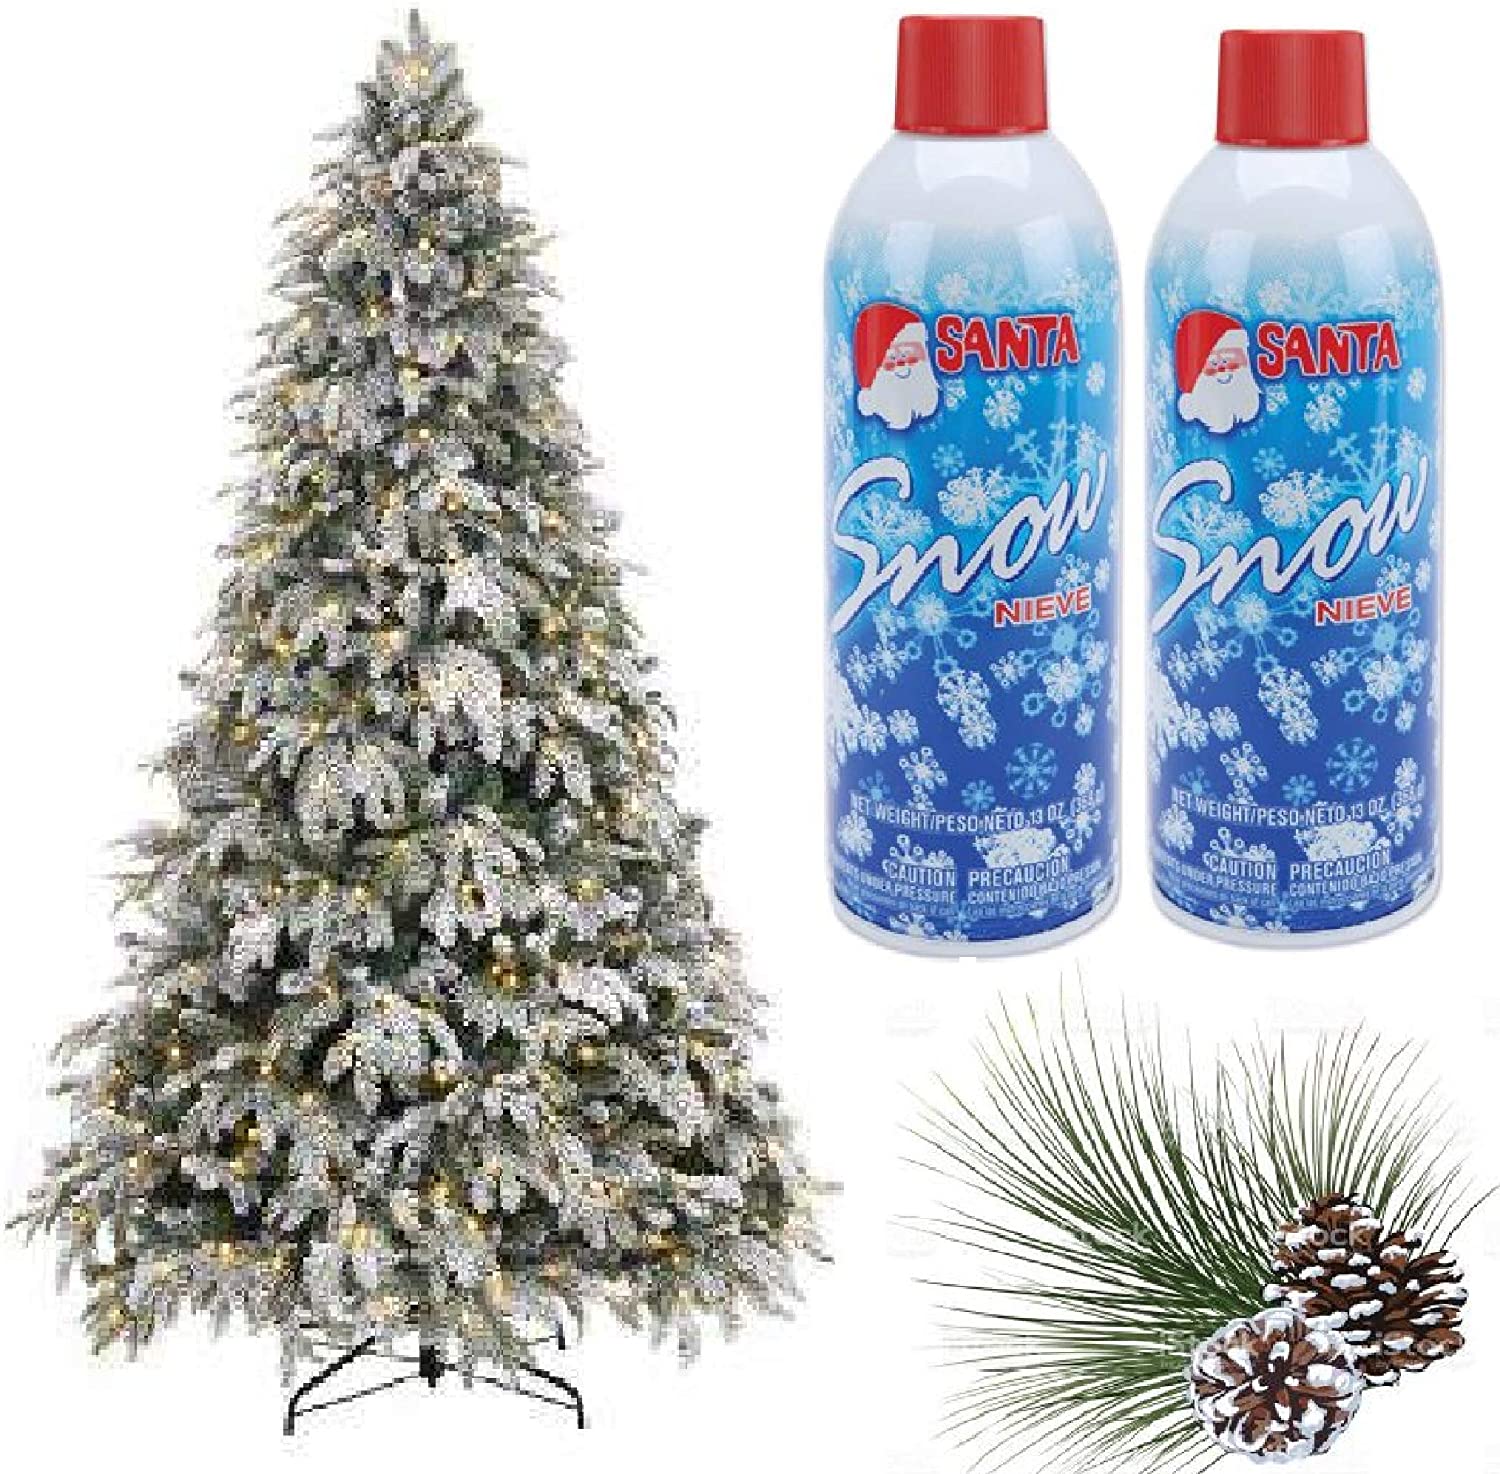 Party Favors Santa Snow Spray Christmas Artificial 9 oz Can For Christmas Tree Decoration Featured Image